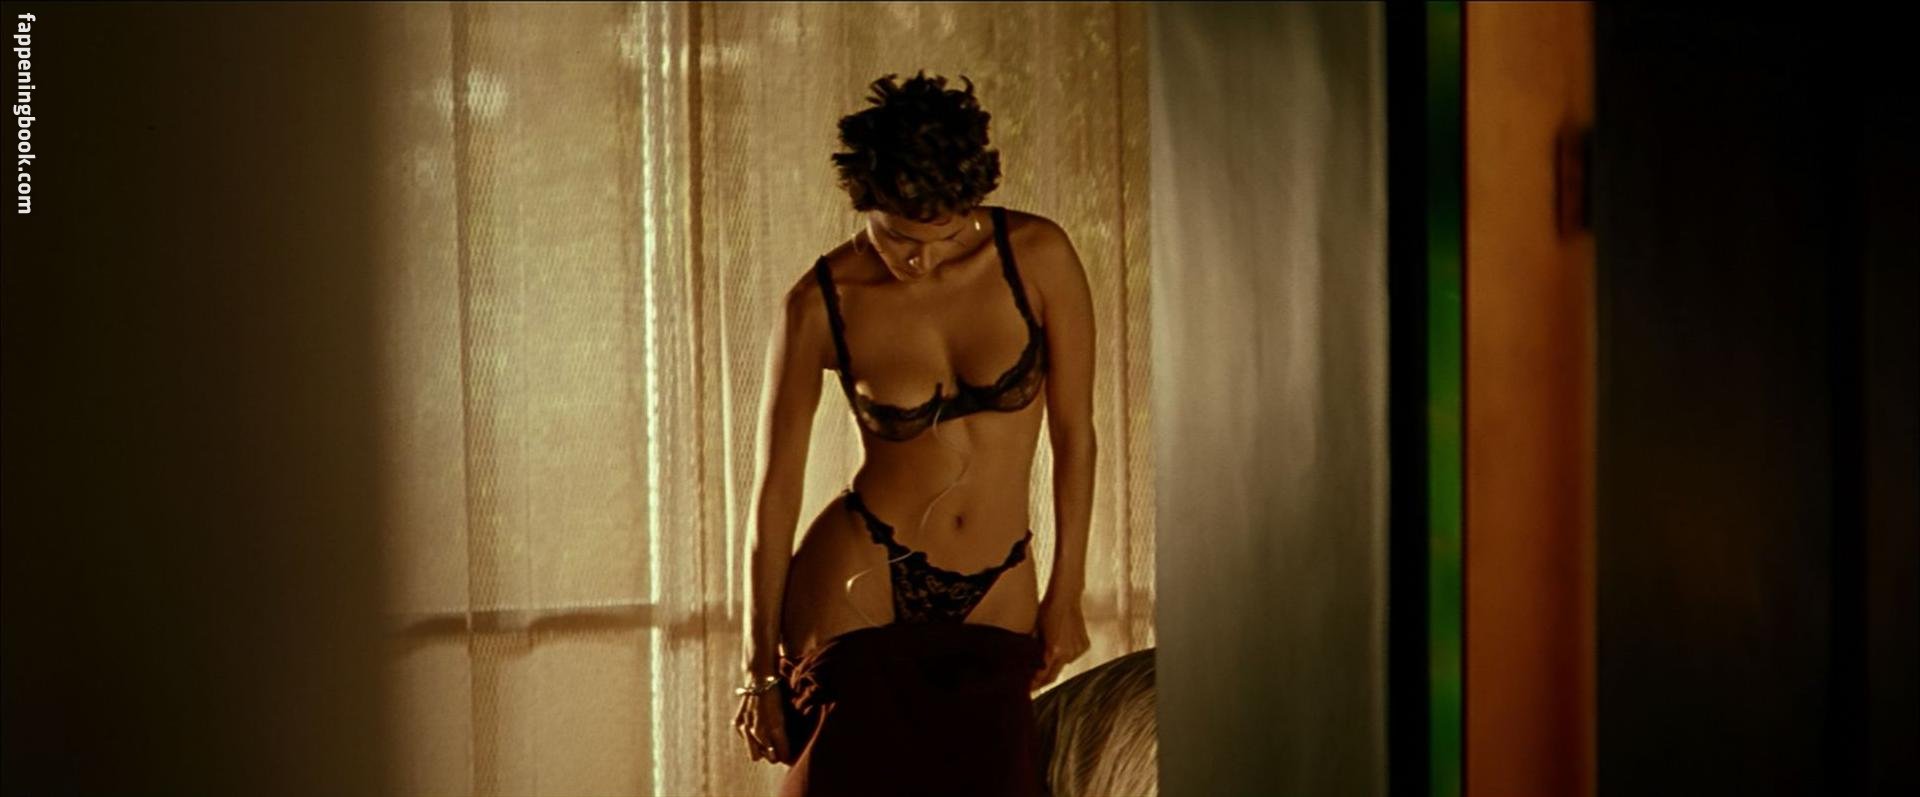 Fappening halle berry 7 Celebrities